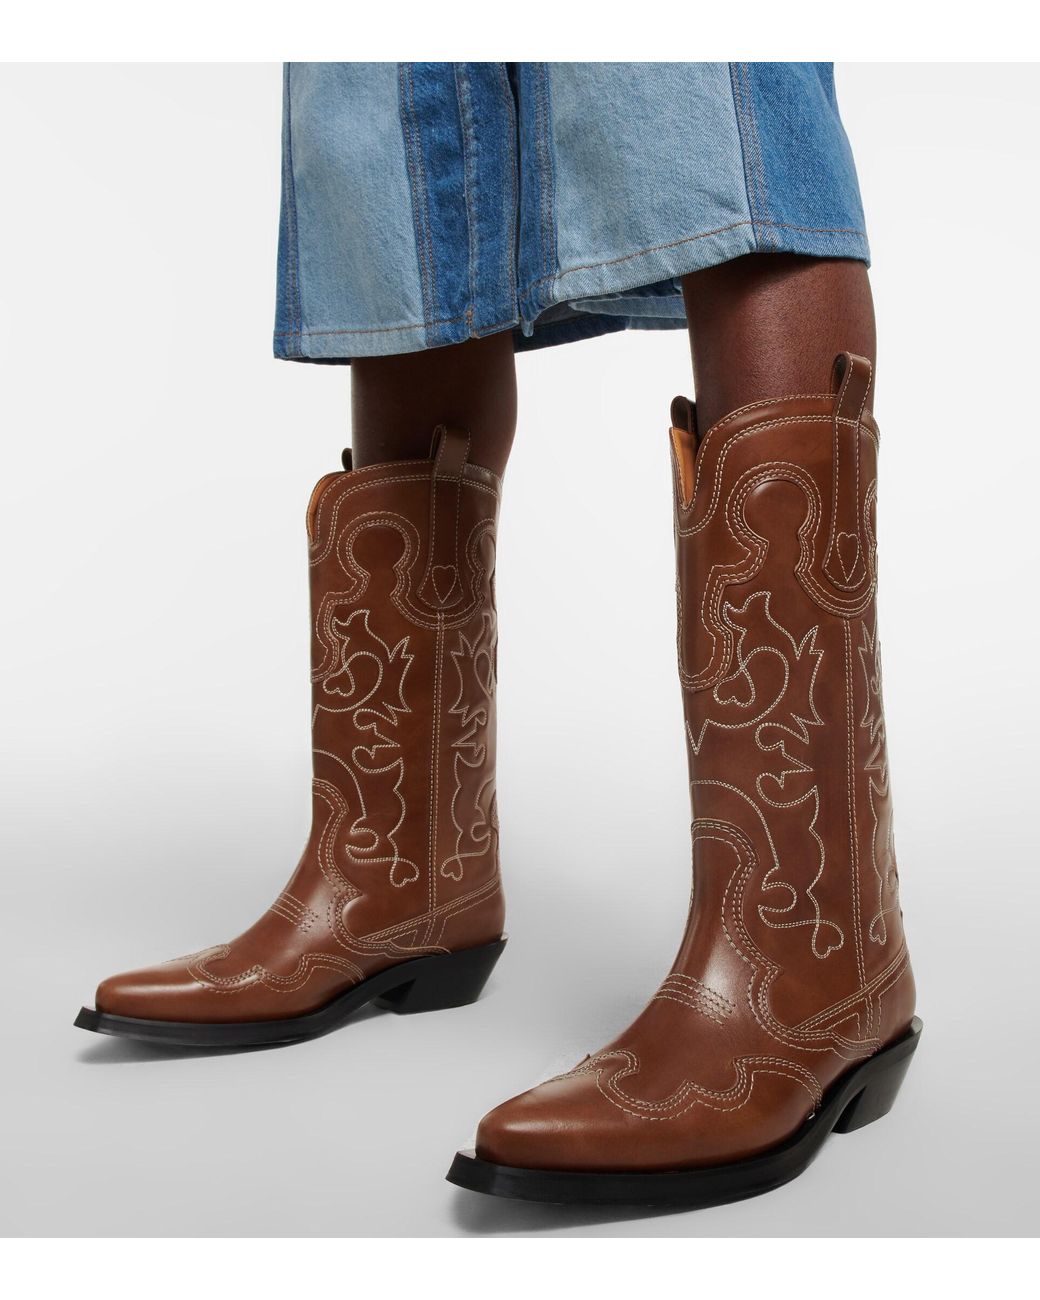 Saks Fifth Avenue Women Shoes Boots Cowboy Boots Embroidered Colorblocked Leather Western Boots 